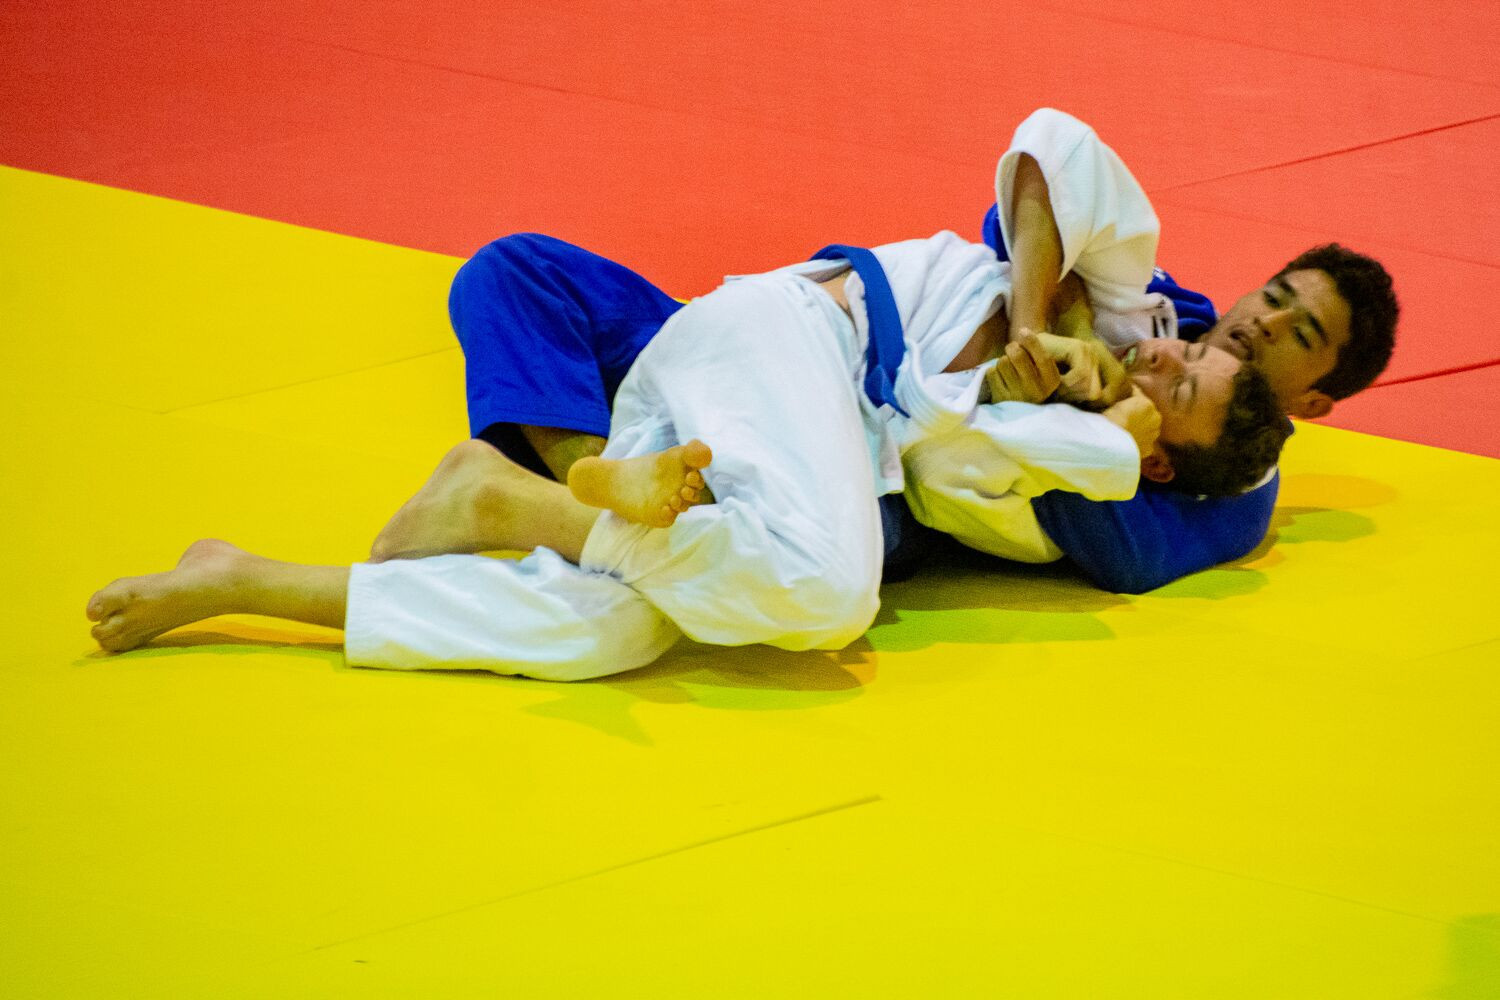 Today marked the first day of the Pacific Games judo competition ©Games News Service